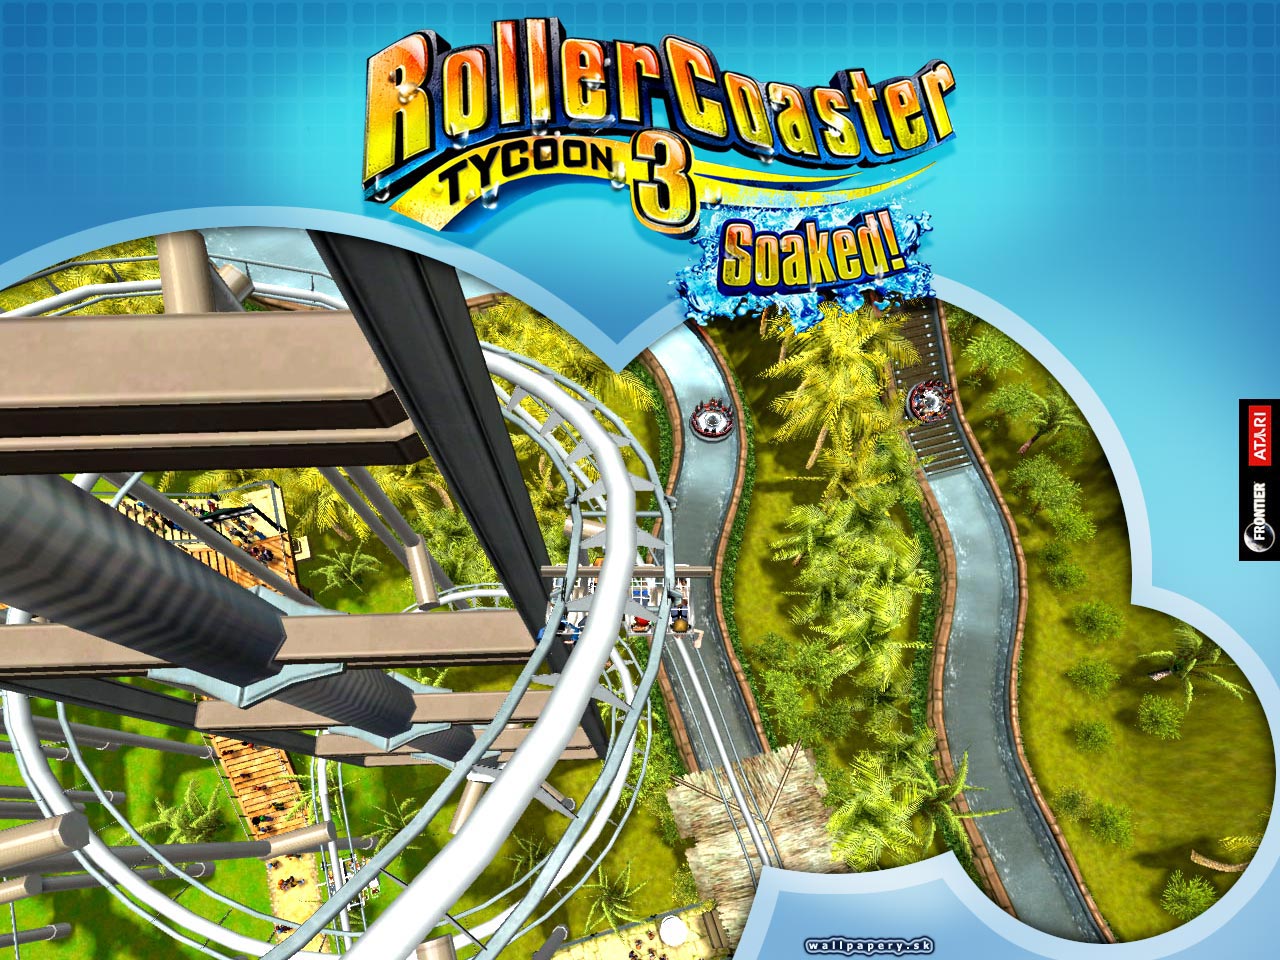 RollerCoaster Tycoon 3: Soaked! - wallpaper 3